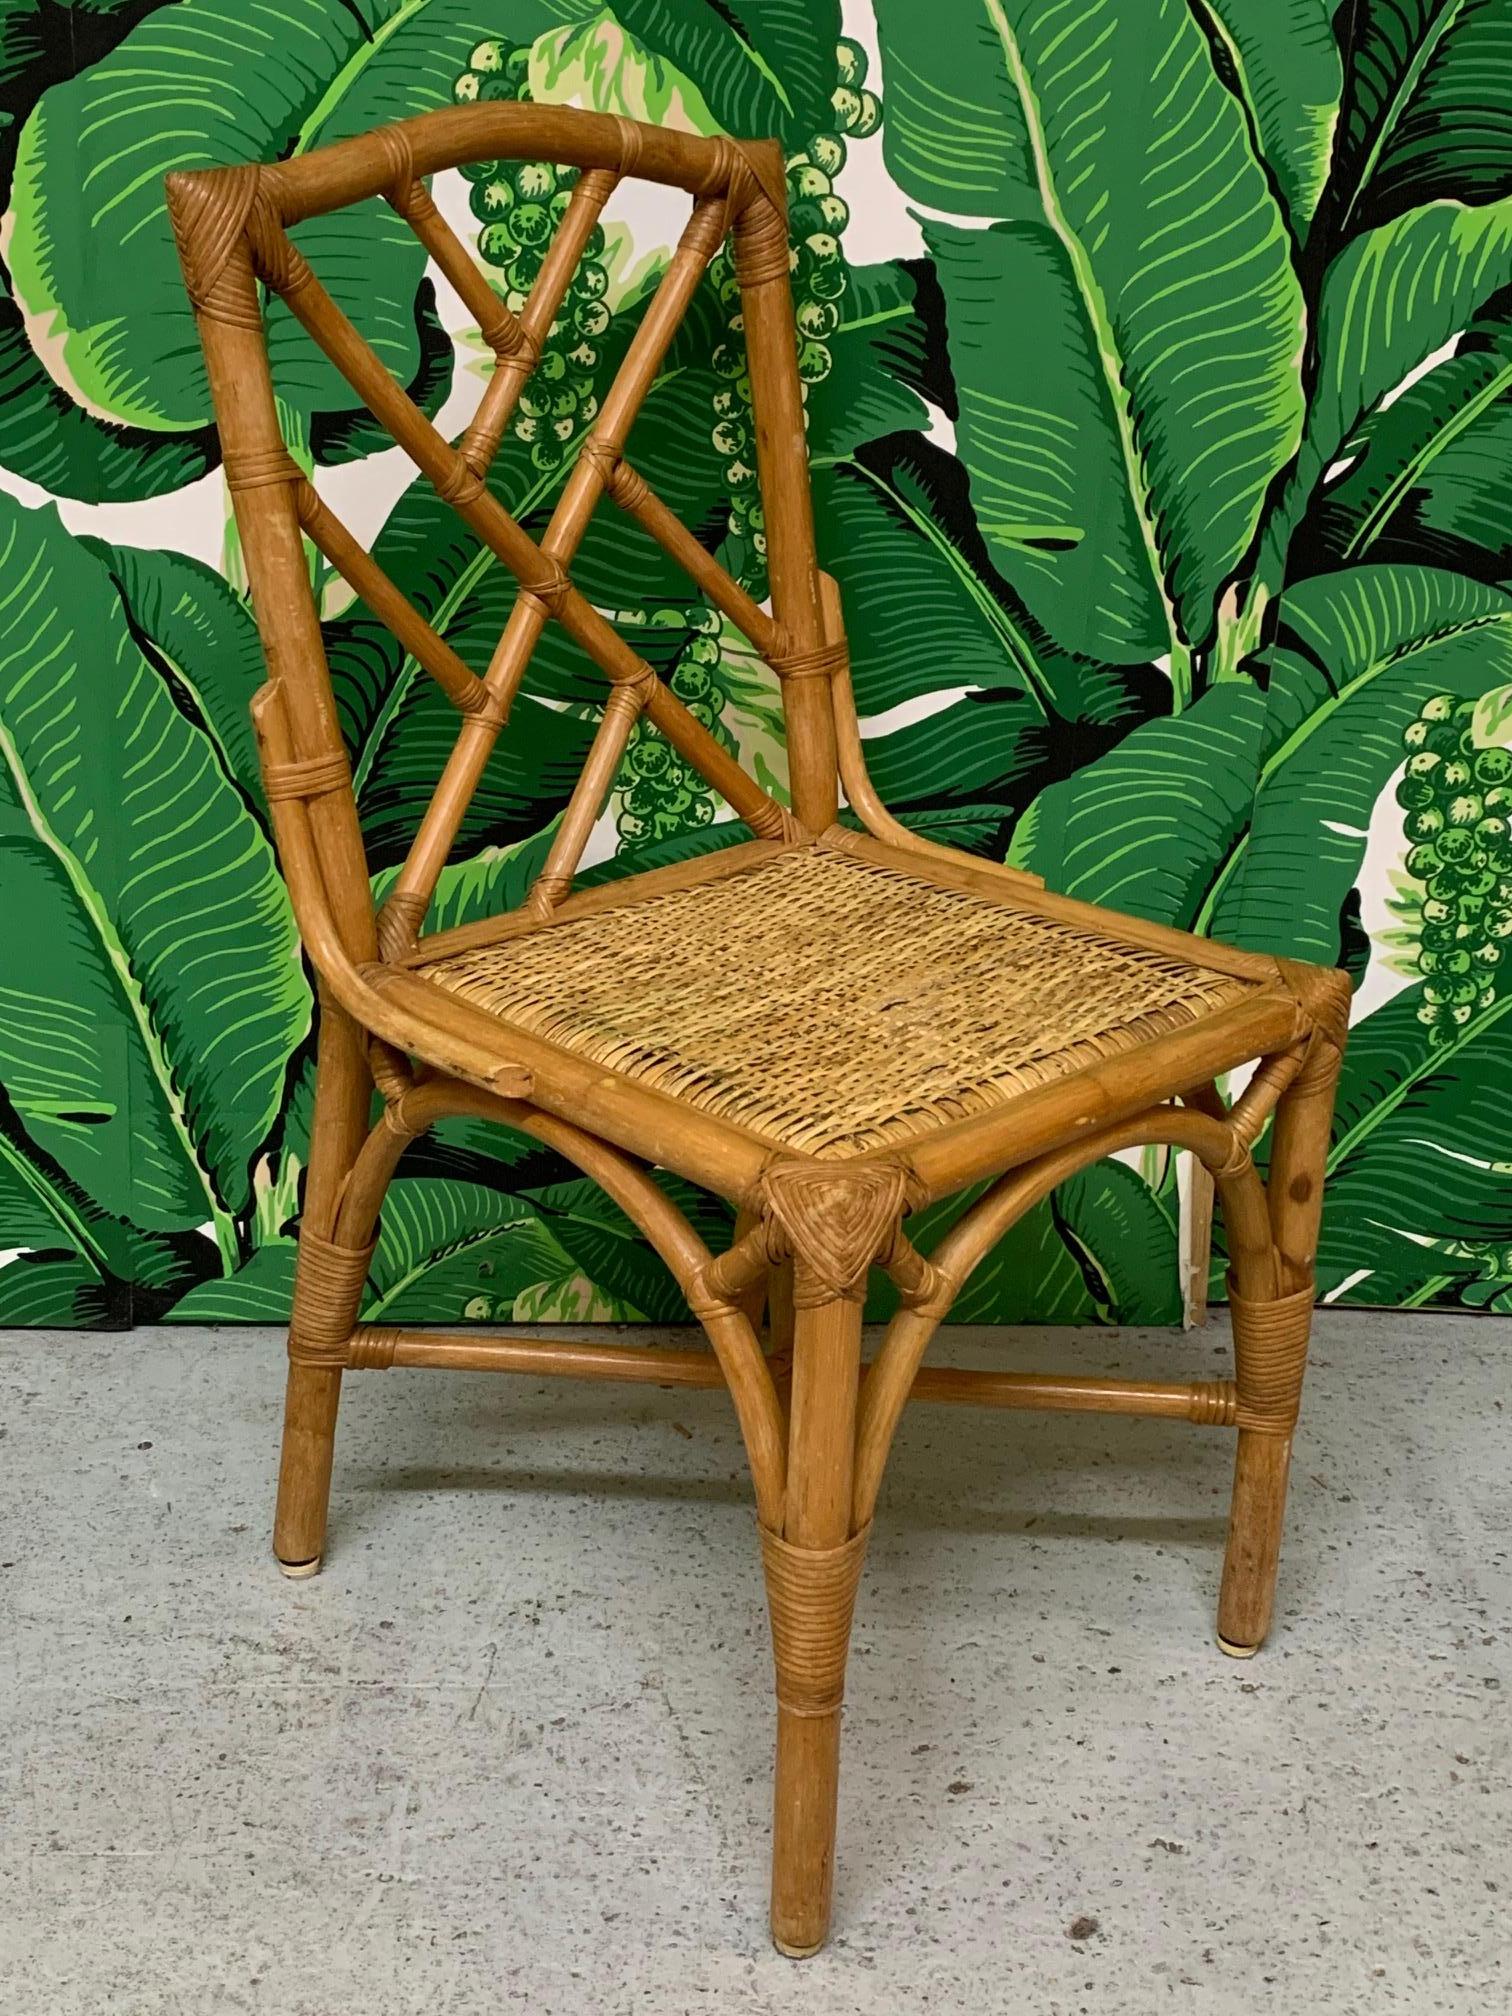 Set of six rattan dining chairs in Asian chinoiserie style. Iconic Chinese Chippendale pattern in back, and woven rattan seats. Good vintage condition with minor imperfections consistent with age.